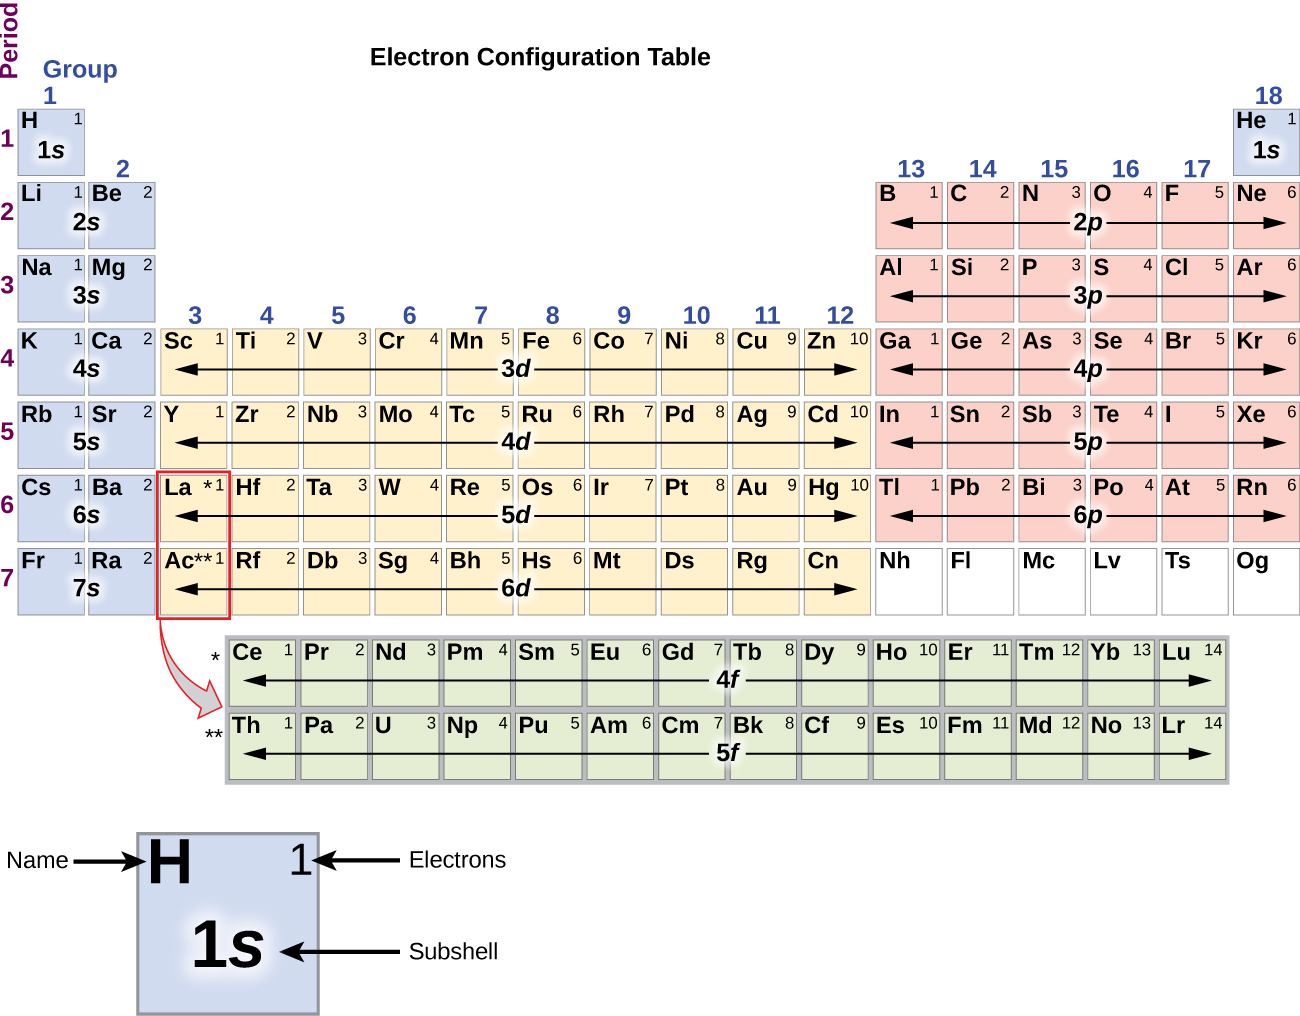 In this figure, a periodic table is shown that is entitled, “Electron Configuration Table.” Beneath the table, a square for the element hydrogen is shown enlarged to provide detail. The element symbol, H, is placed in the upper left corner. In the upper right is the number of electrons, 1. The lower central portion of the element square contains the subshell, 1s. Helium and elements in groups 1 and 2 are shaded blue. In this region, the rows are labeled 1s through 7s moving down the table. Groups 3 through 12 are shaded orange, and the rows are labeled 3d through 6d moving down the table. Groups 13 through 18, except helium, are shaded pink and are labeled 2p through 6p moving down the table. The lanthanide and actinide series across the bottom of the table are shaded grey and are labeled 4f and 5f, respectively.